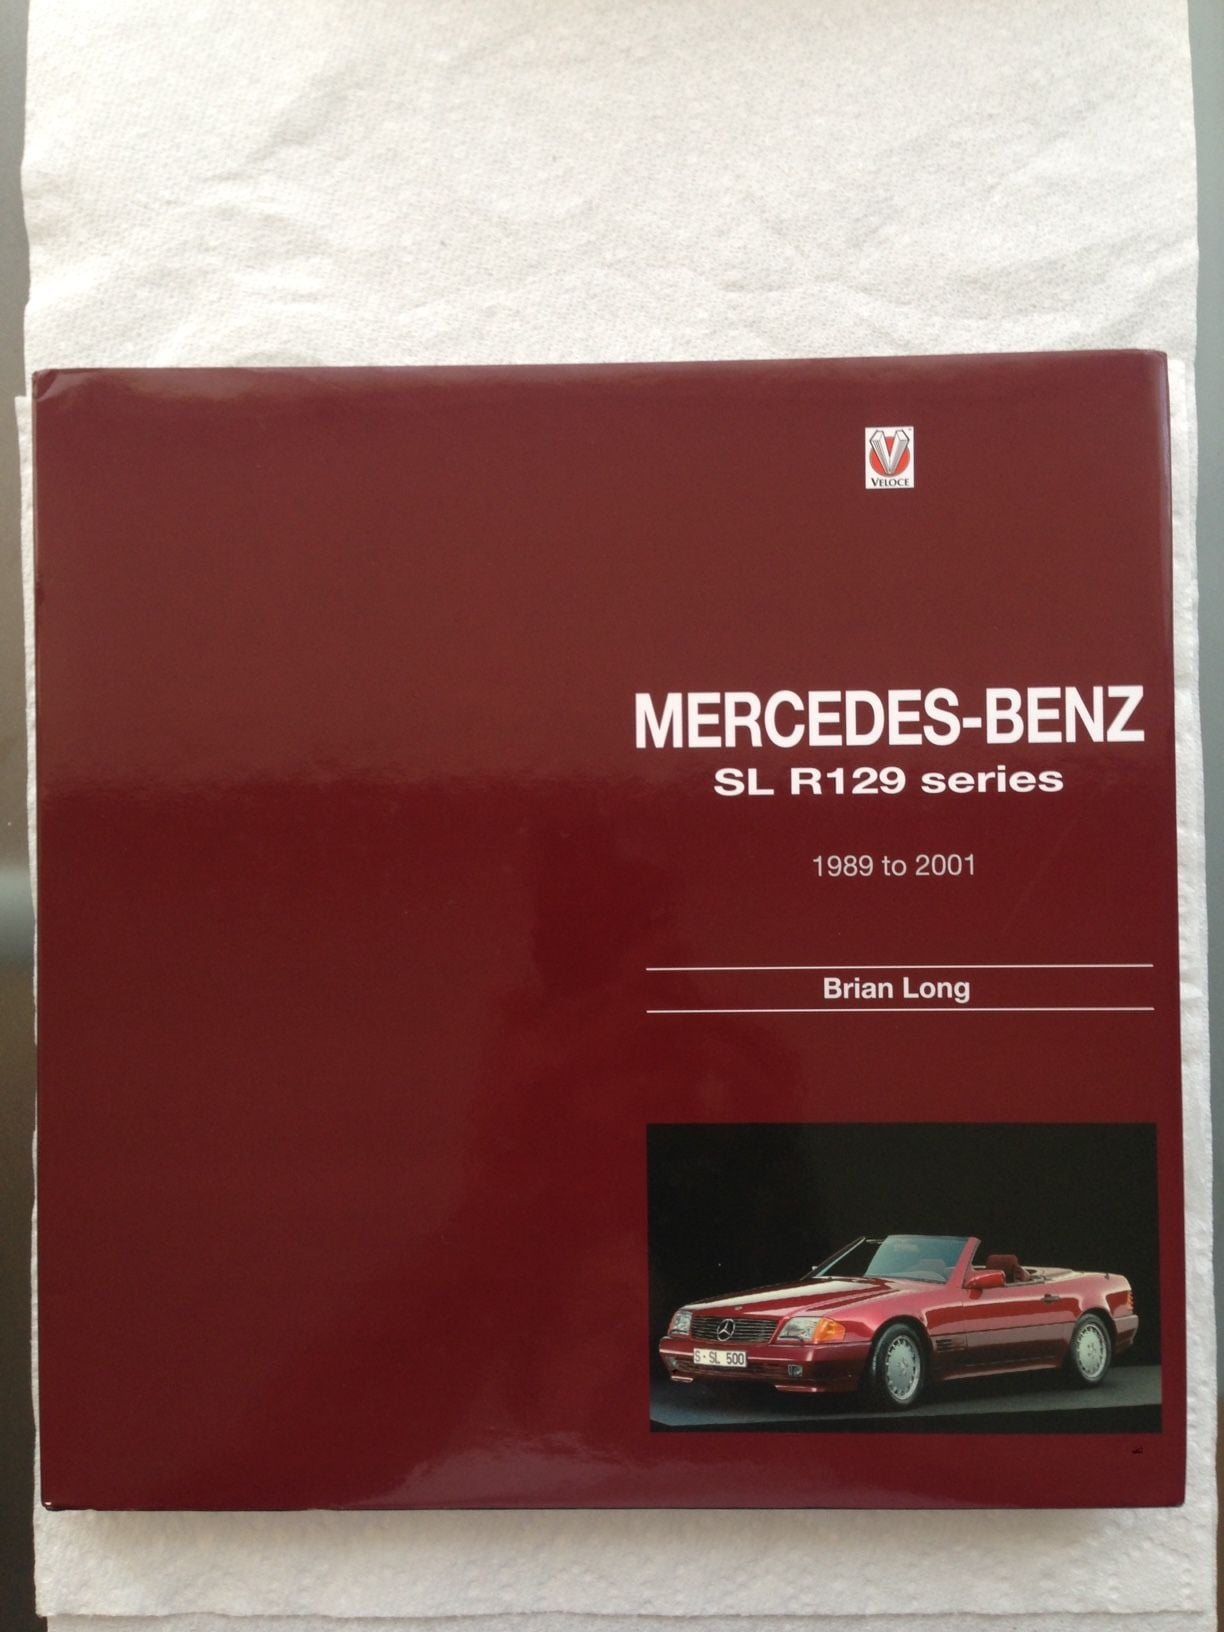 Miscellaneous - Mercedes-Benz SL R129 series 1989 to 2001 by Brian Long - Hardcover book $350 - New - 1989 to 2001 Mercedes-Benz SL-Class - Los Angeles, CA 90005, United States